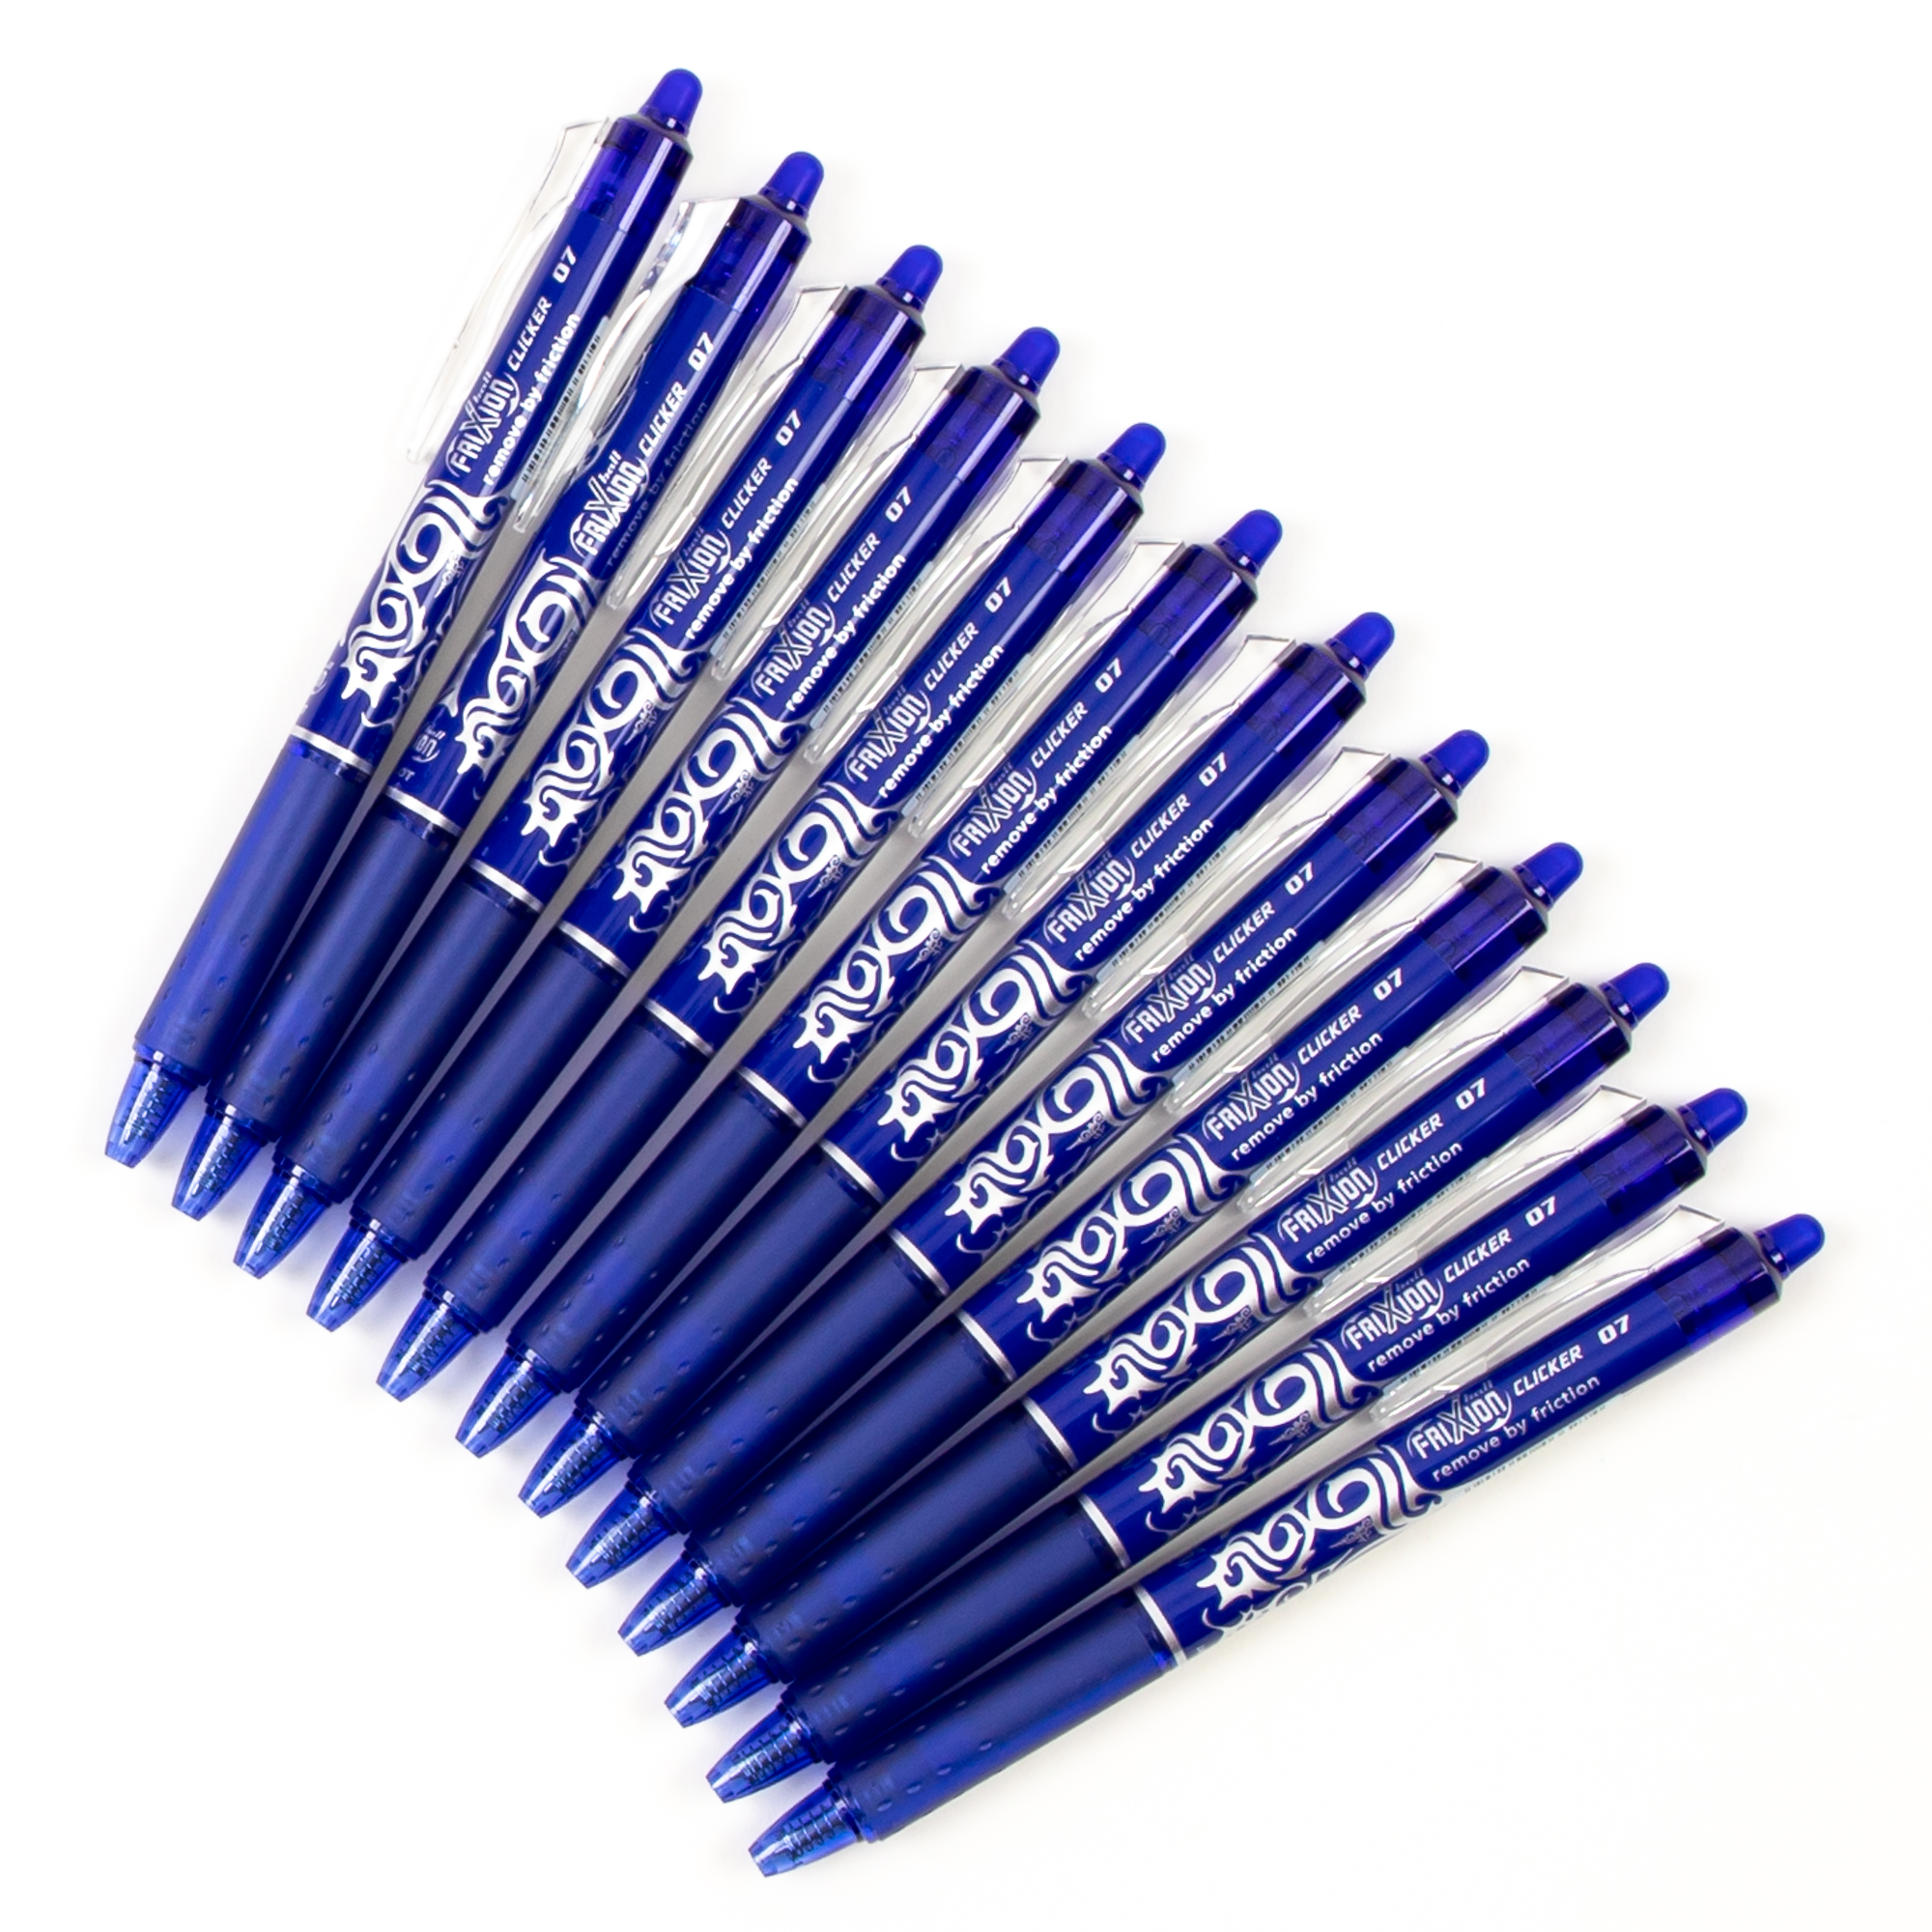 HC1201166 - PILOT FriXion Clicker Rollerball Pens - Blue - Pack of